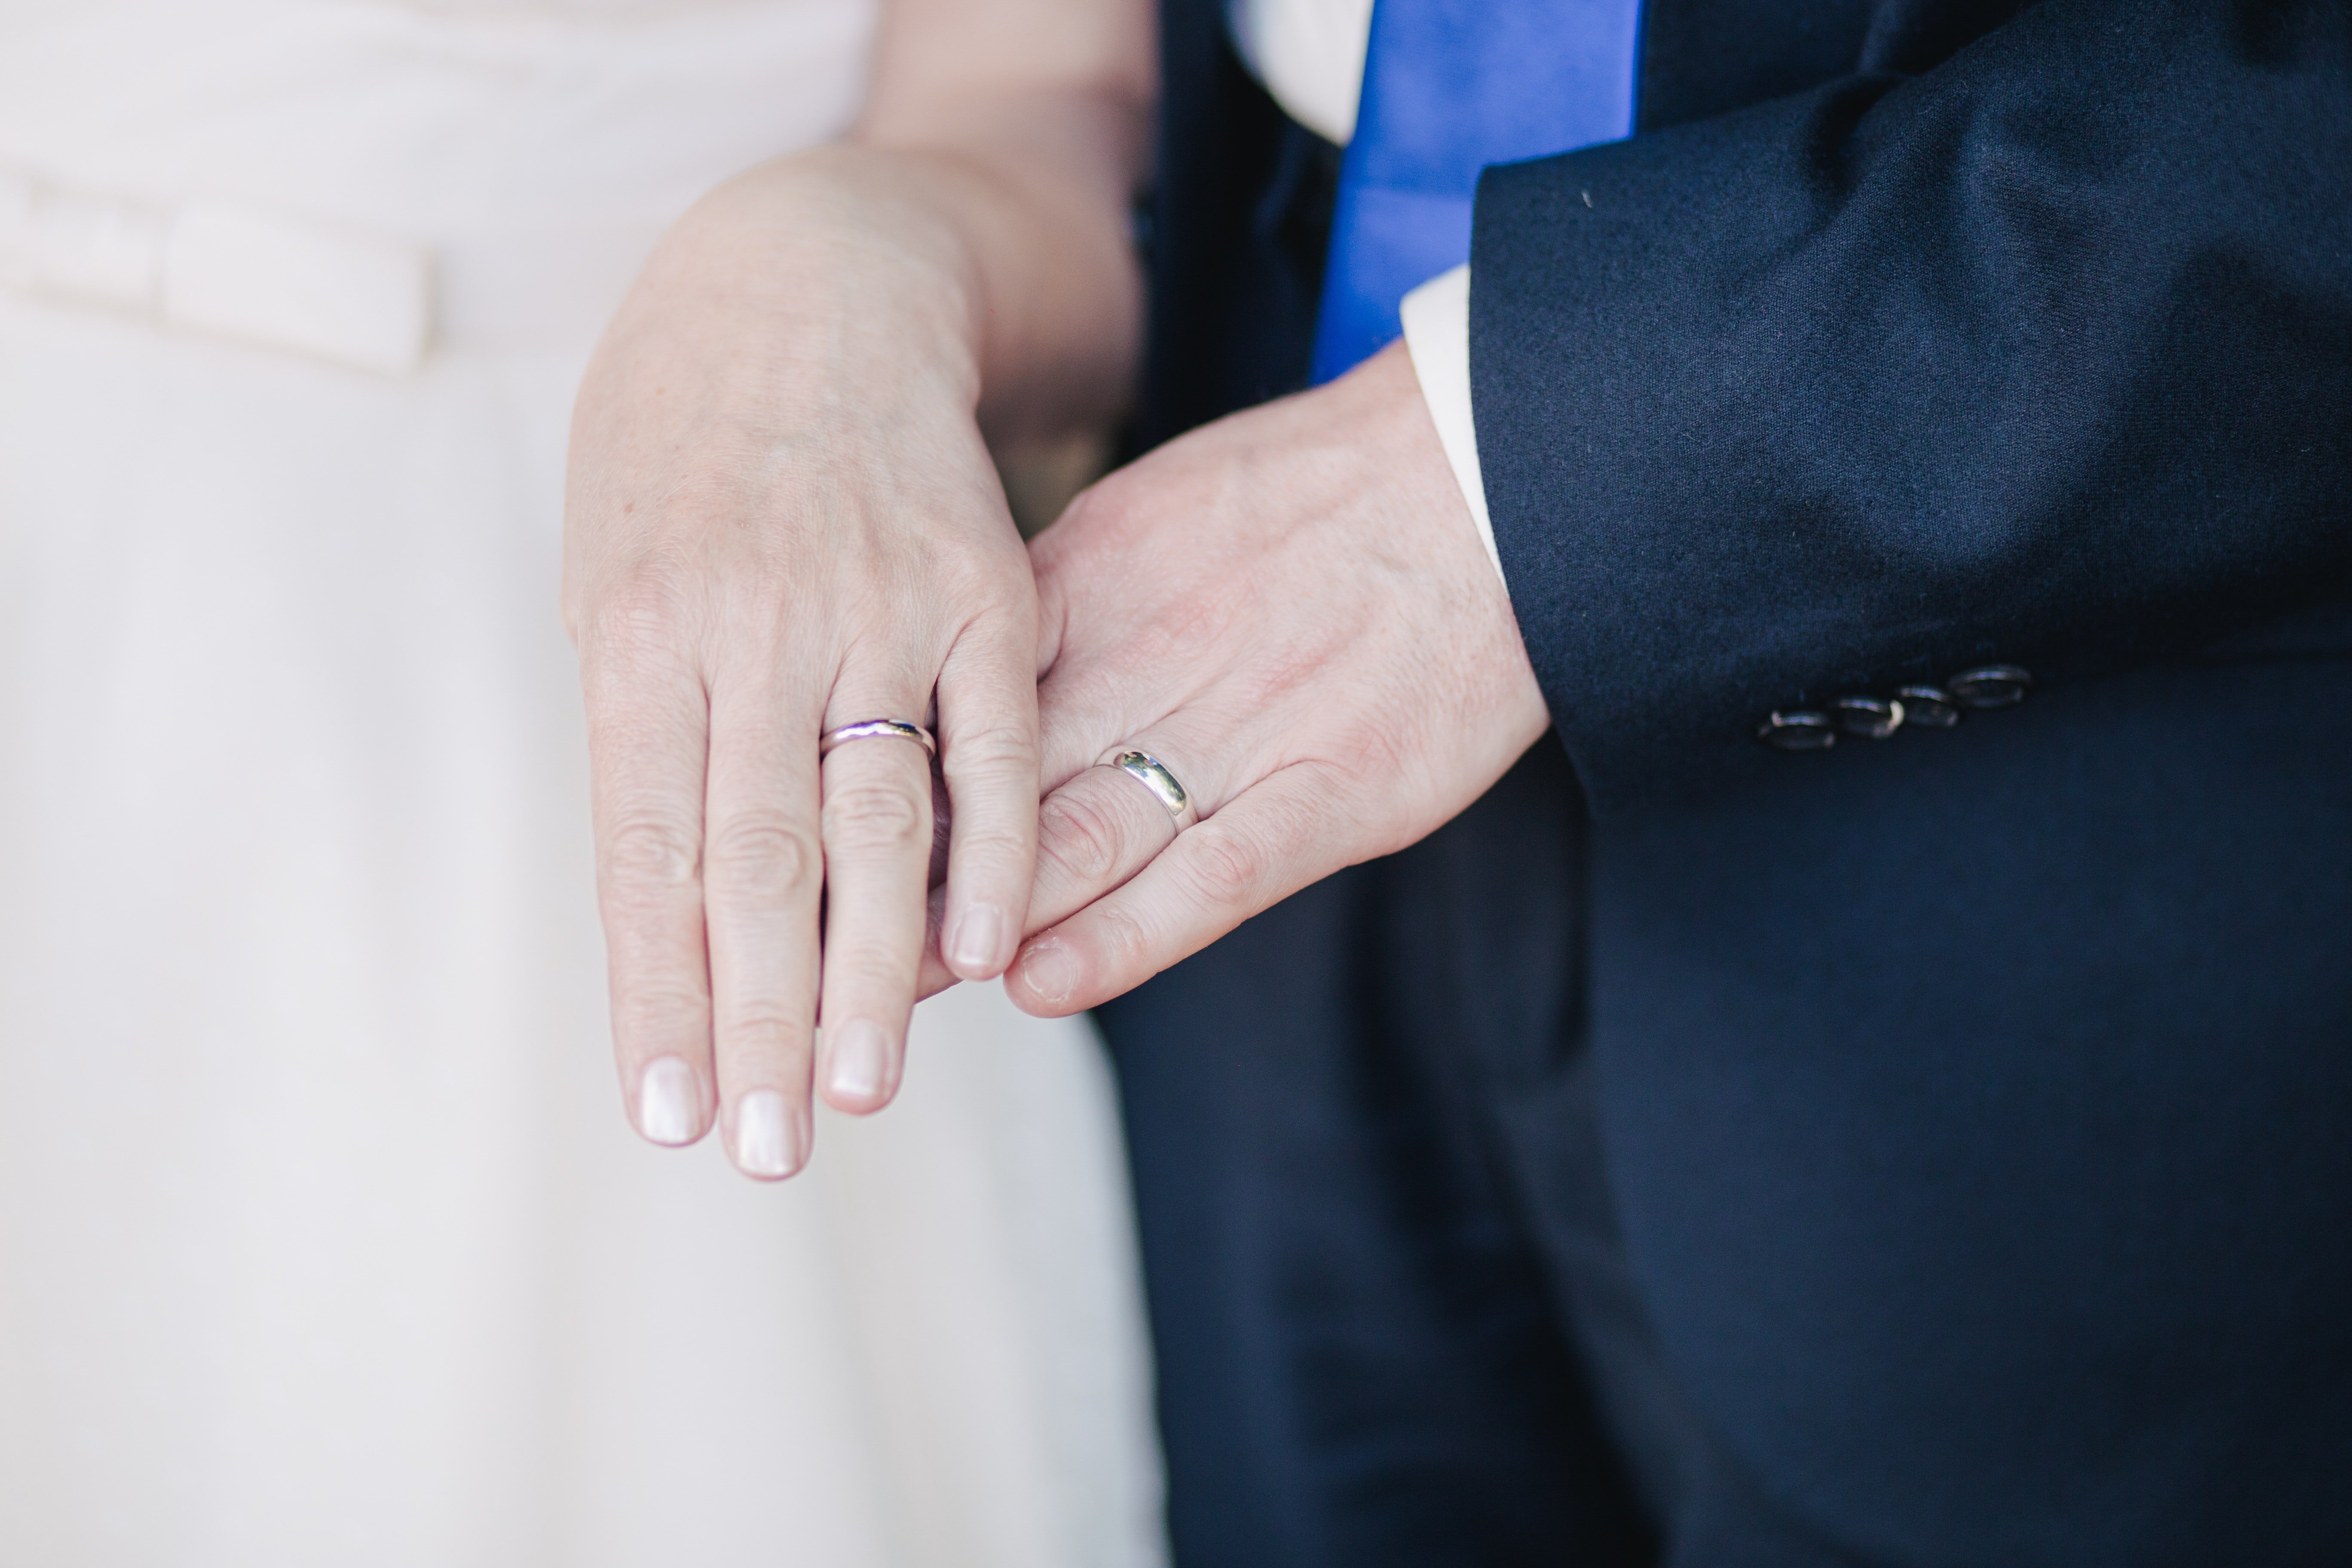 Martha and Chester got married | Photo: Unsplash